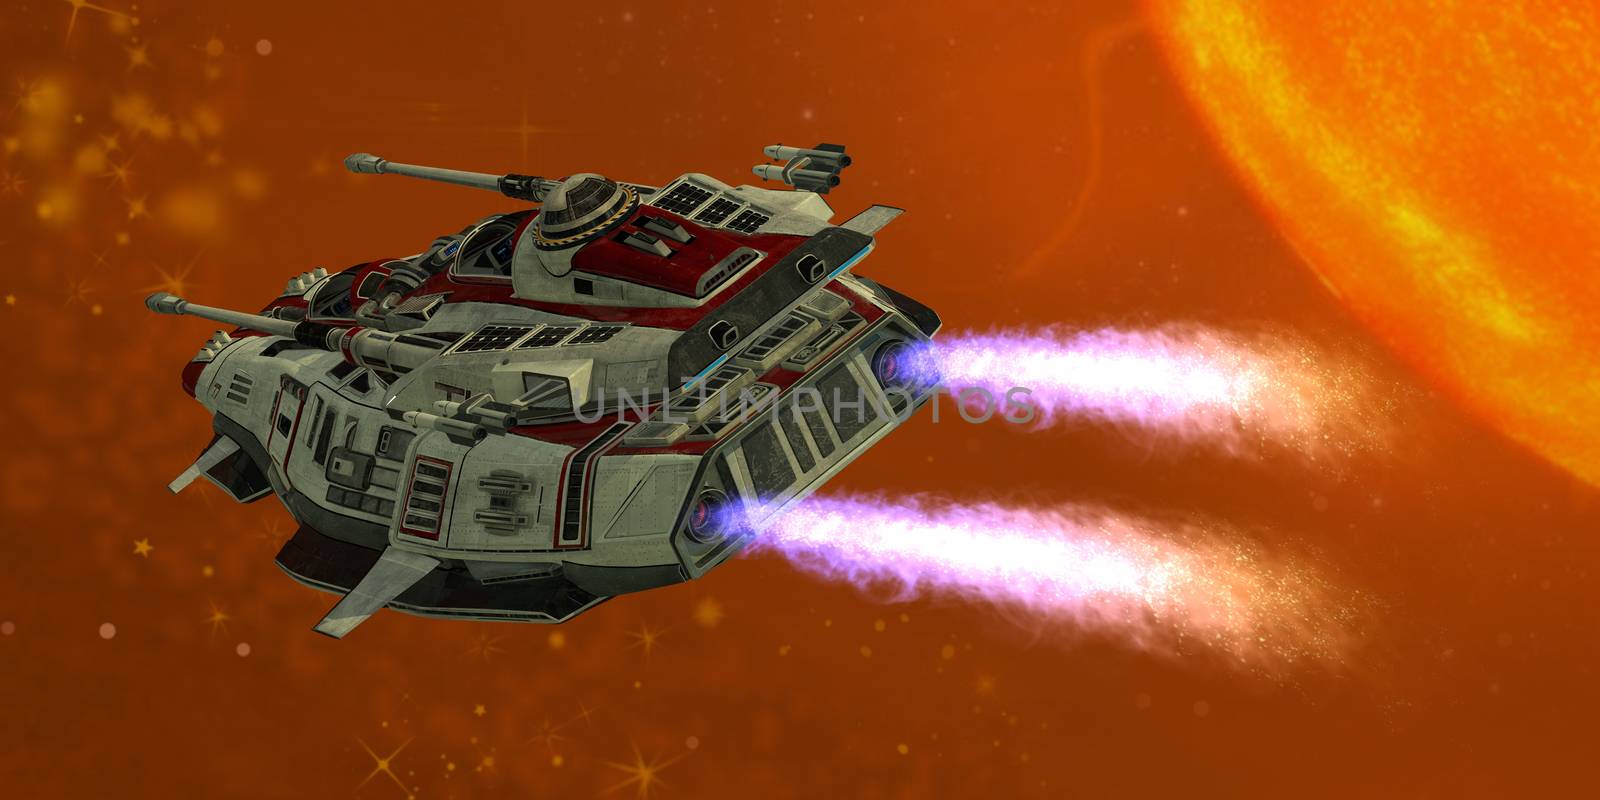 The Ironstar battleship flies near a large sun on its space mission.